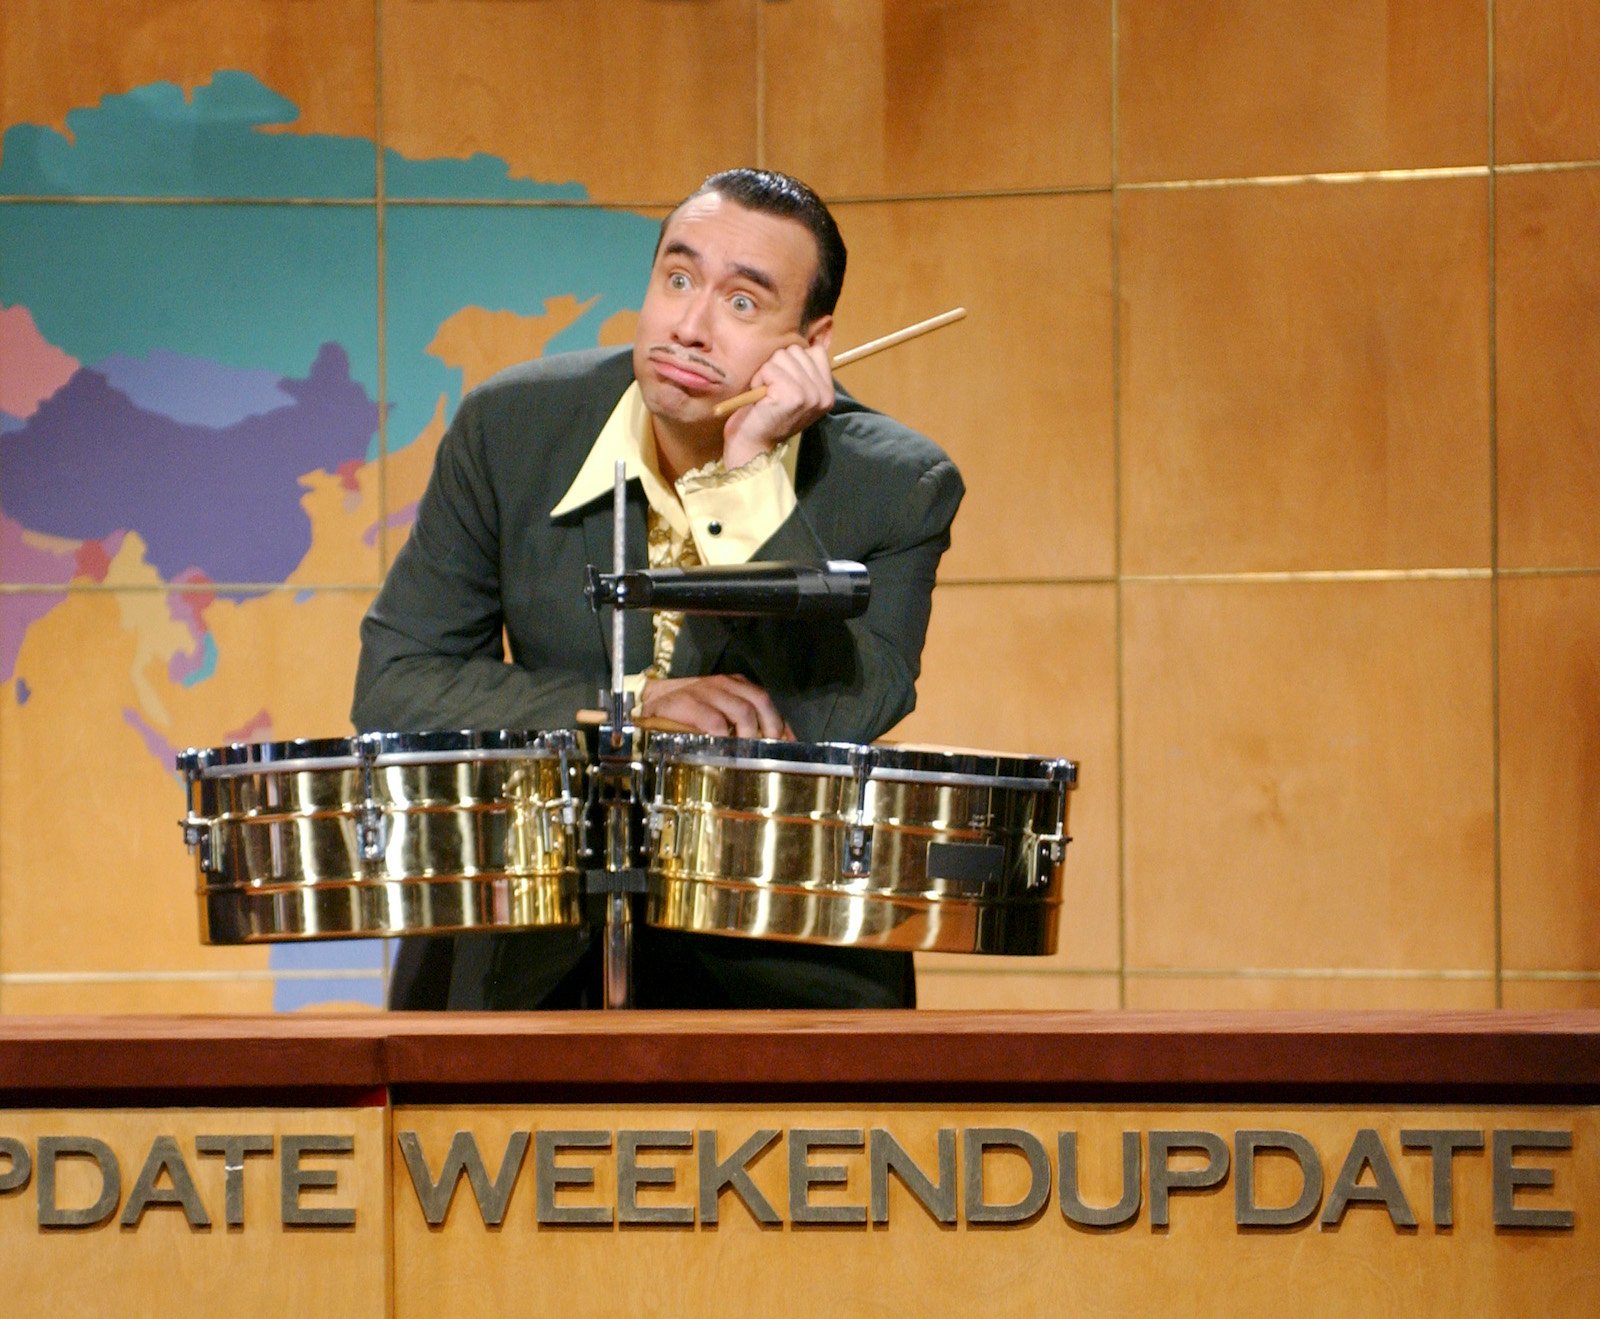 Fred Armisen leans on drums as Fericito on 'Weekend Update' on SNL